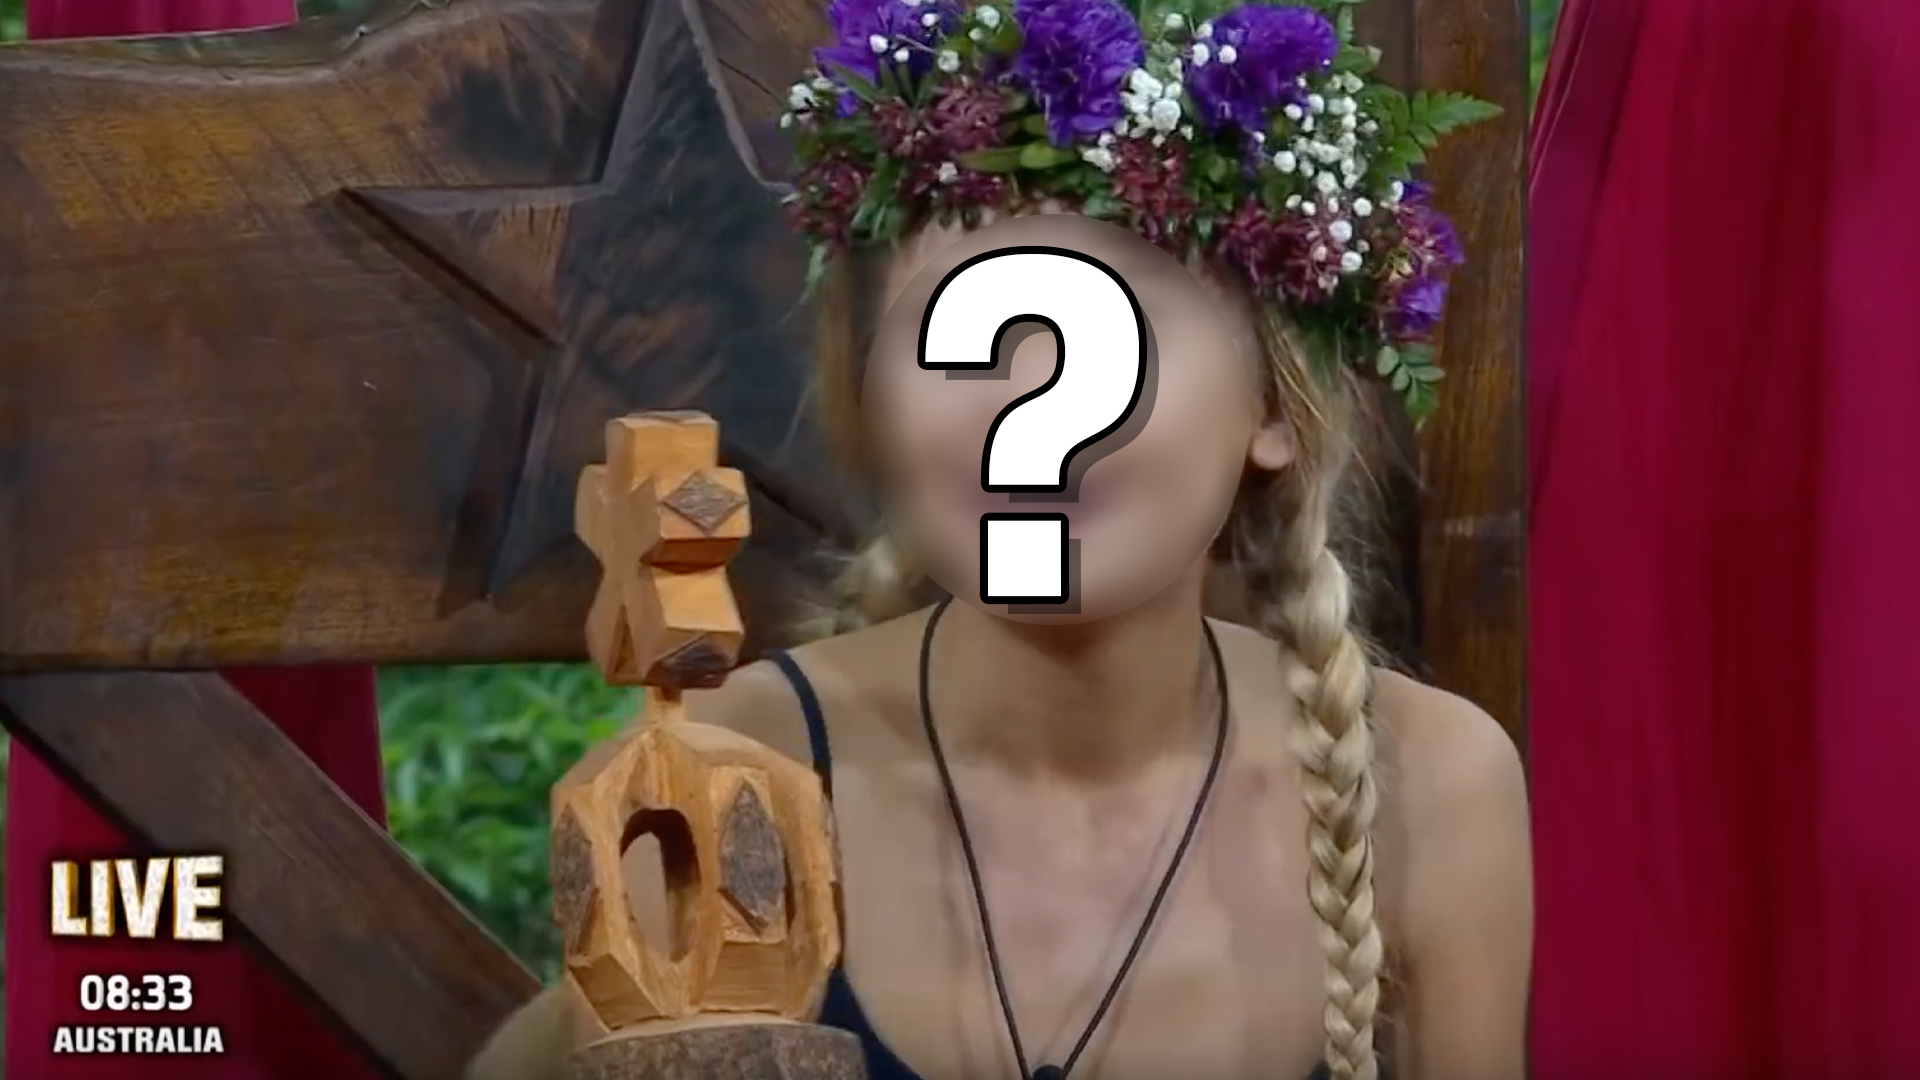 2017's I'm A Celebrity... Get Me Out Of Here! Queen of the Jungle